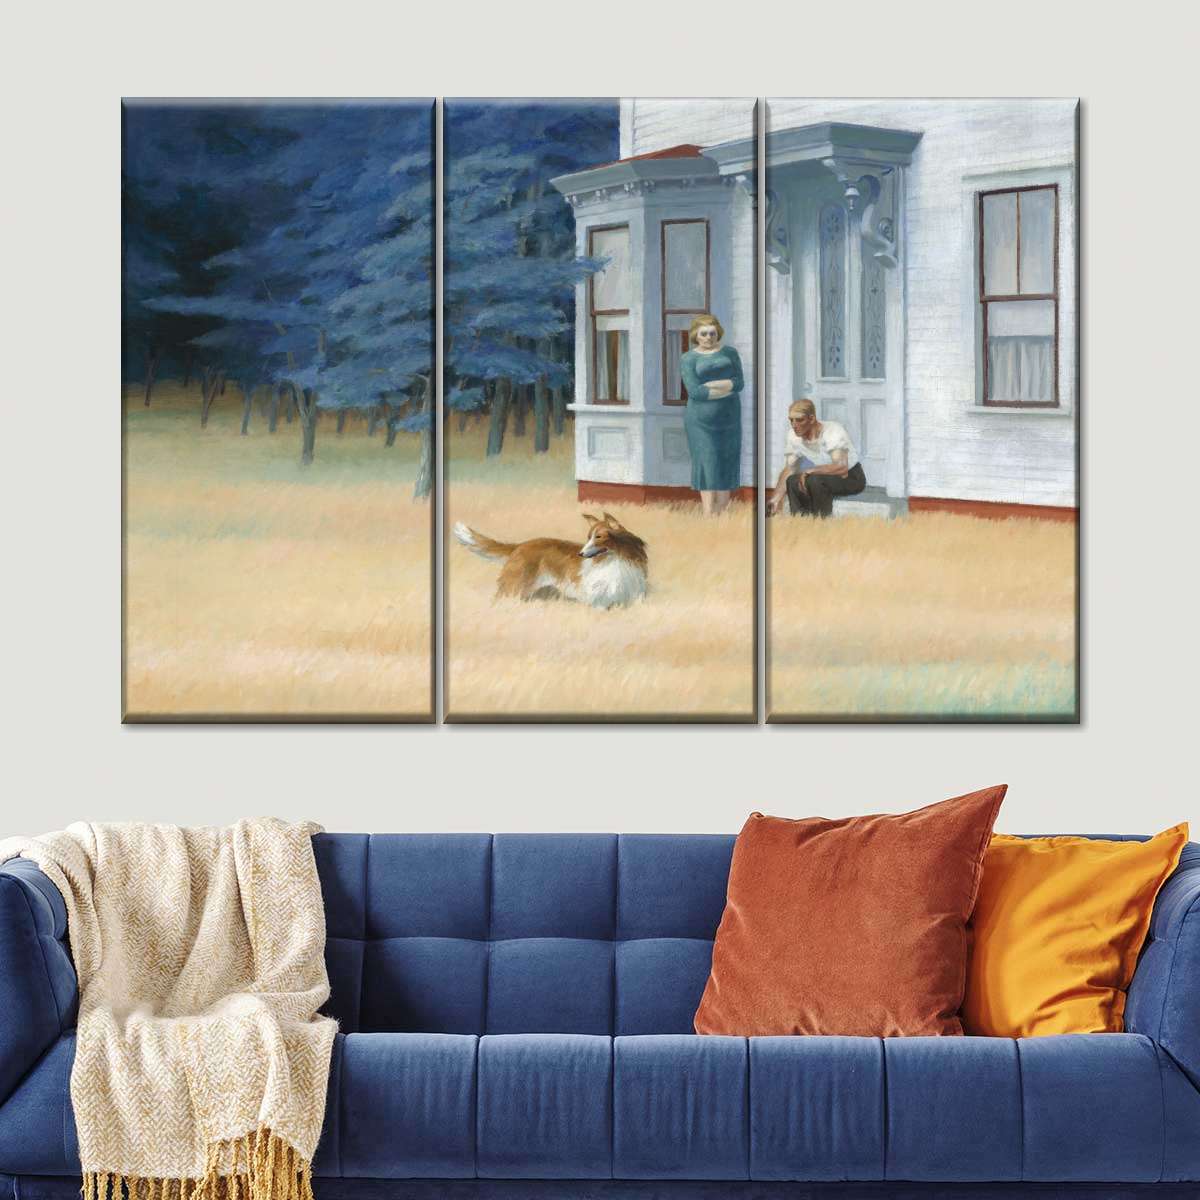 18+ Most Cape cod wall art images info